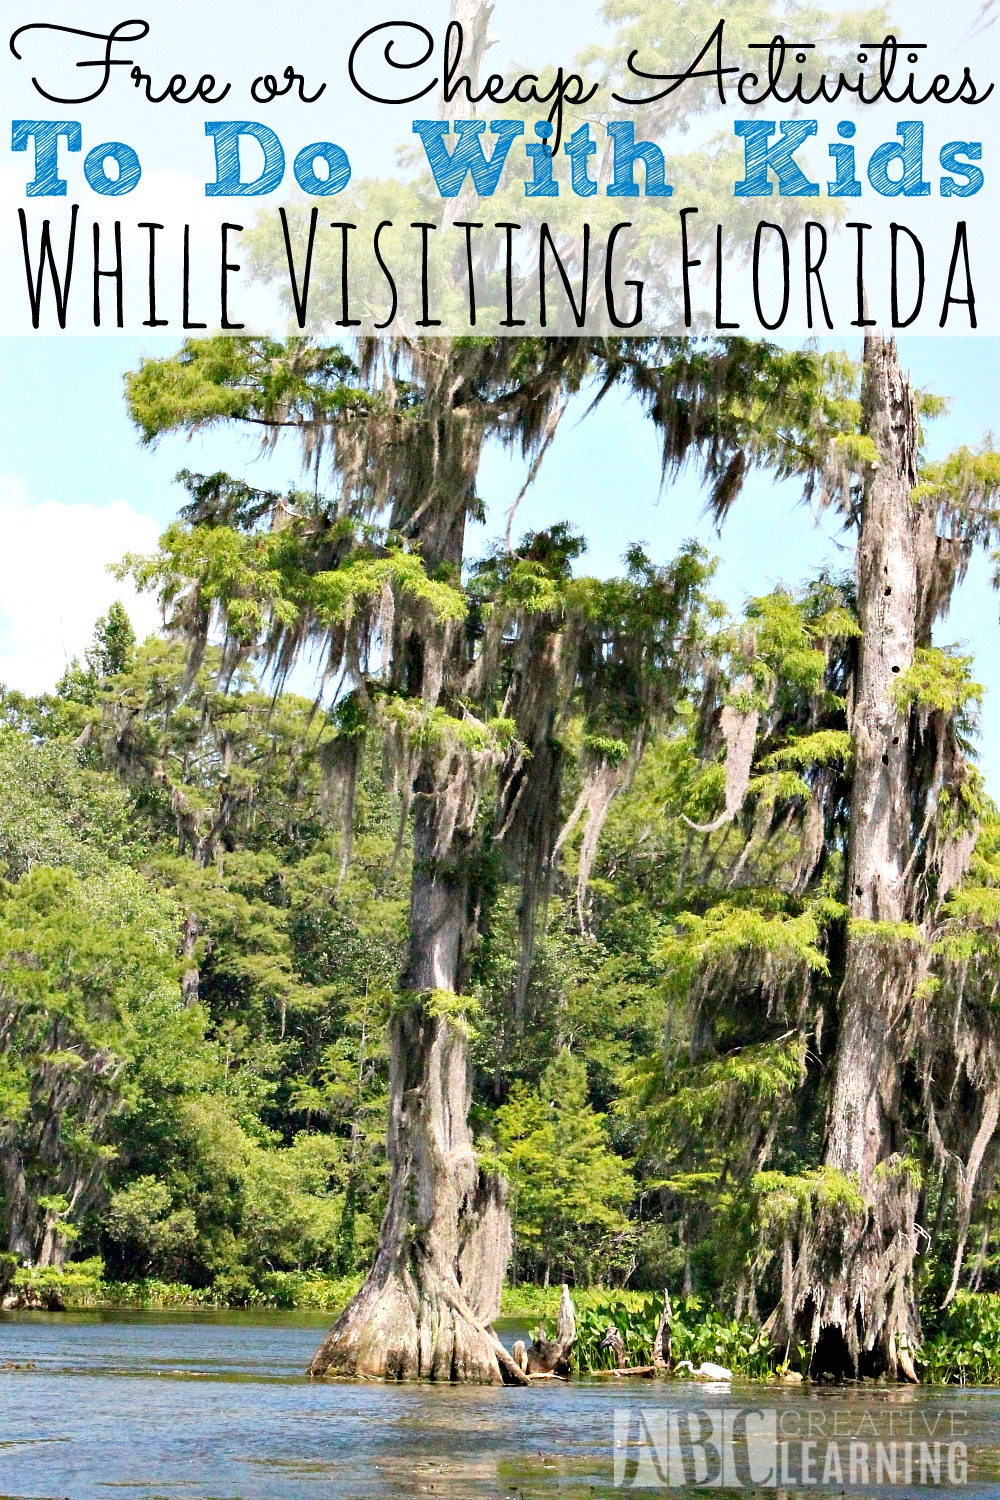 Free or Cheap Activities To Do With Kids In Florida